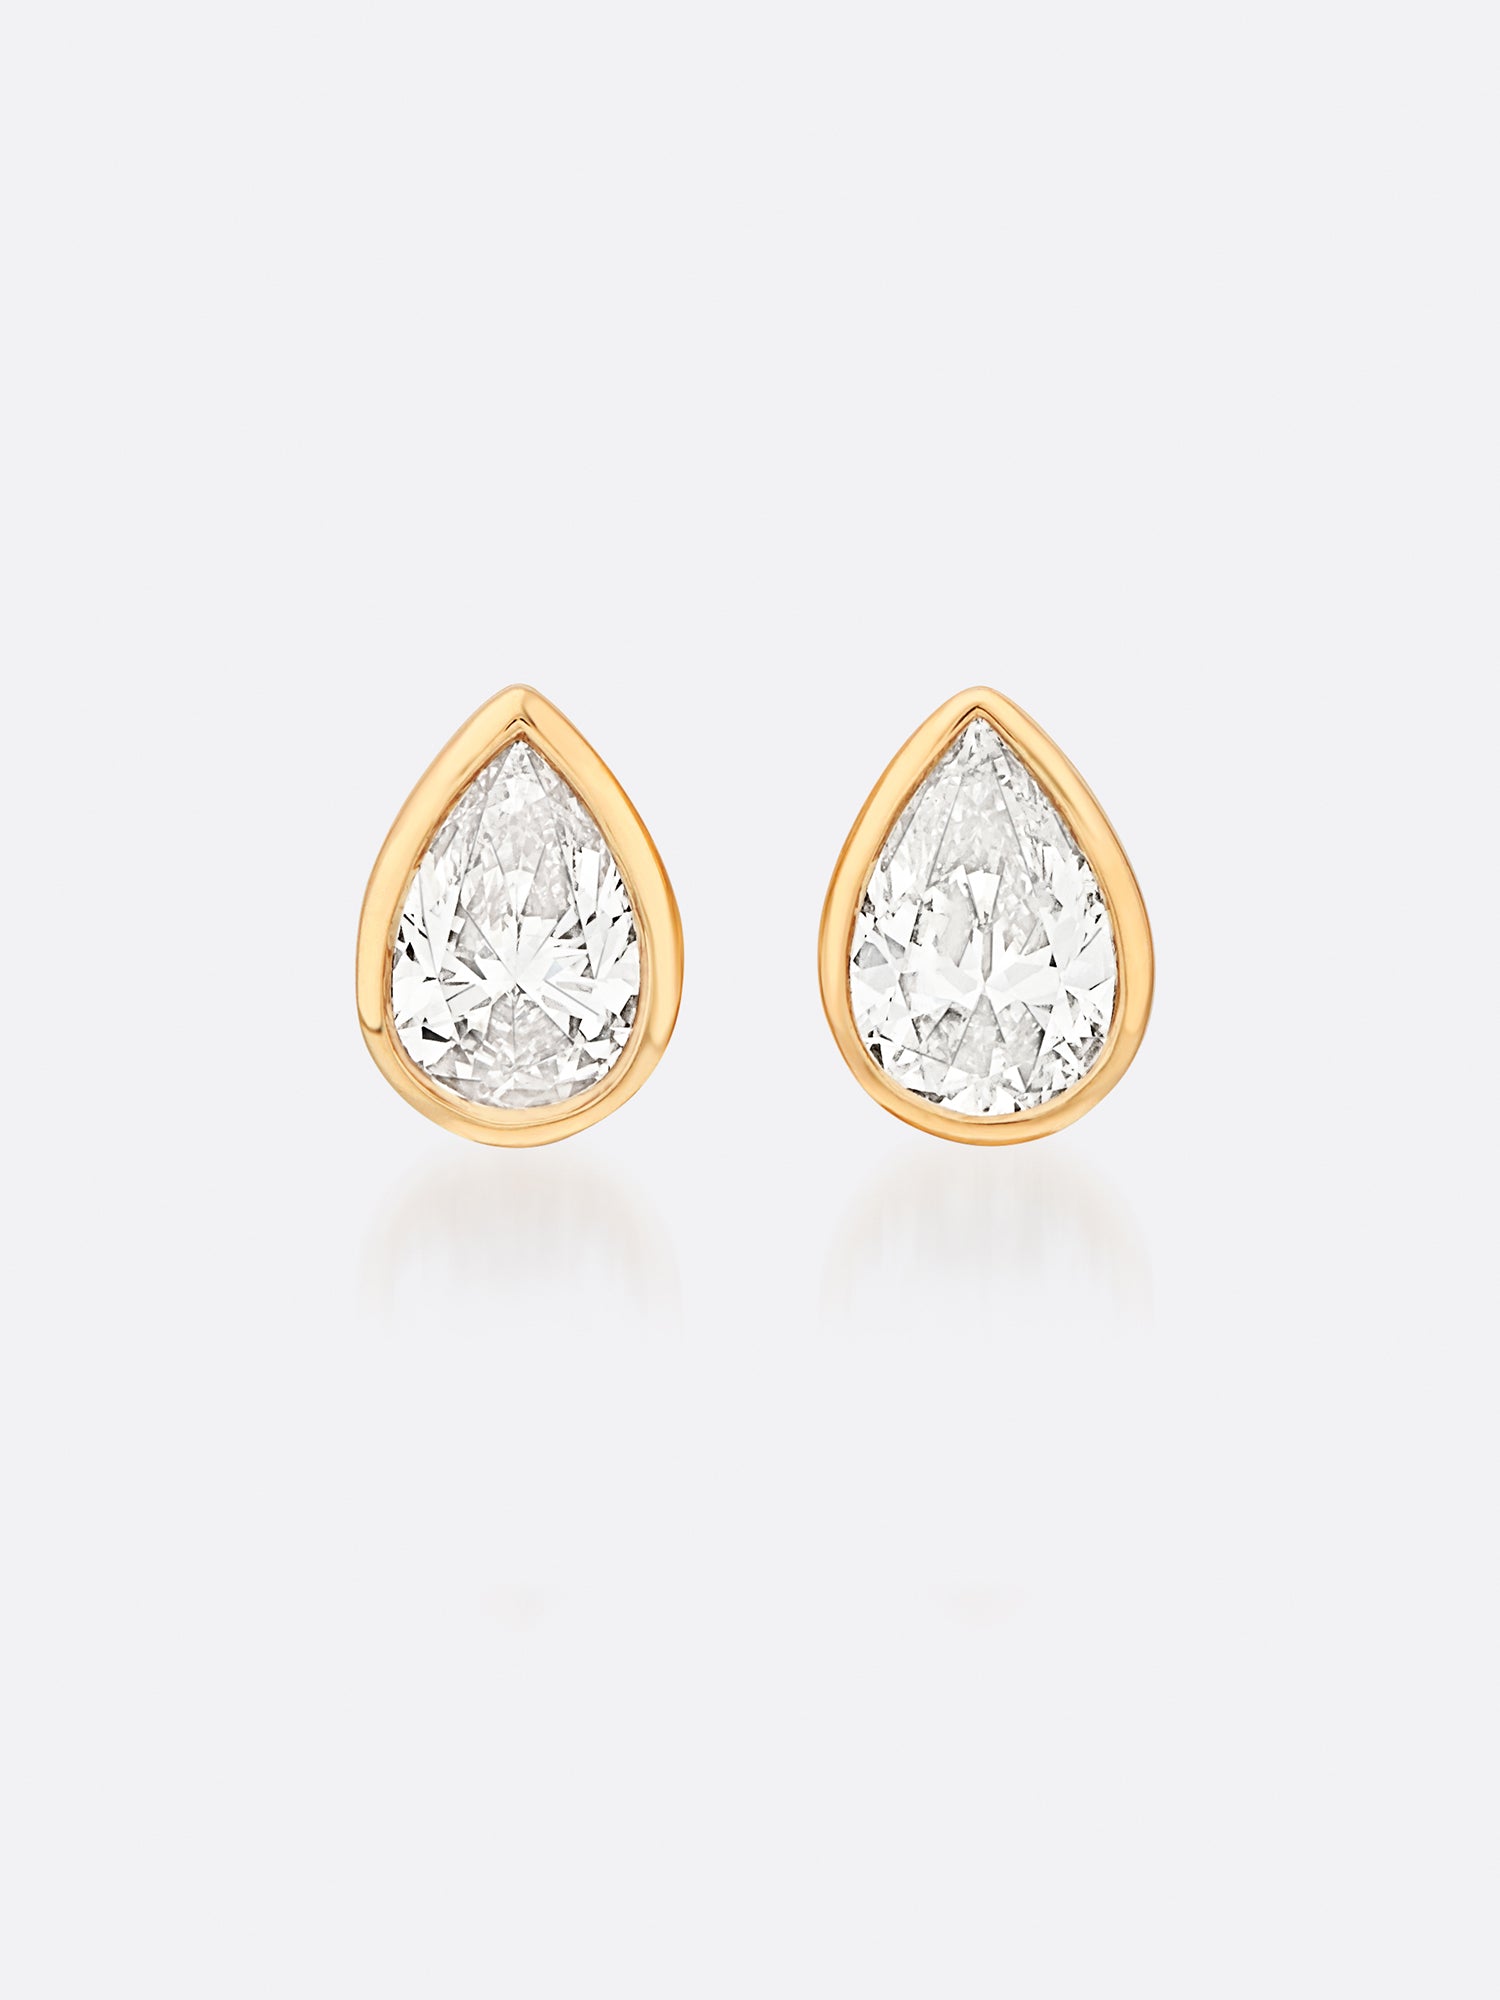 18k yellow gold Romance Pear Diamond Droplet earrings front view